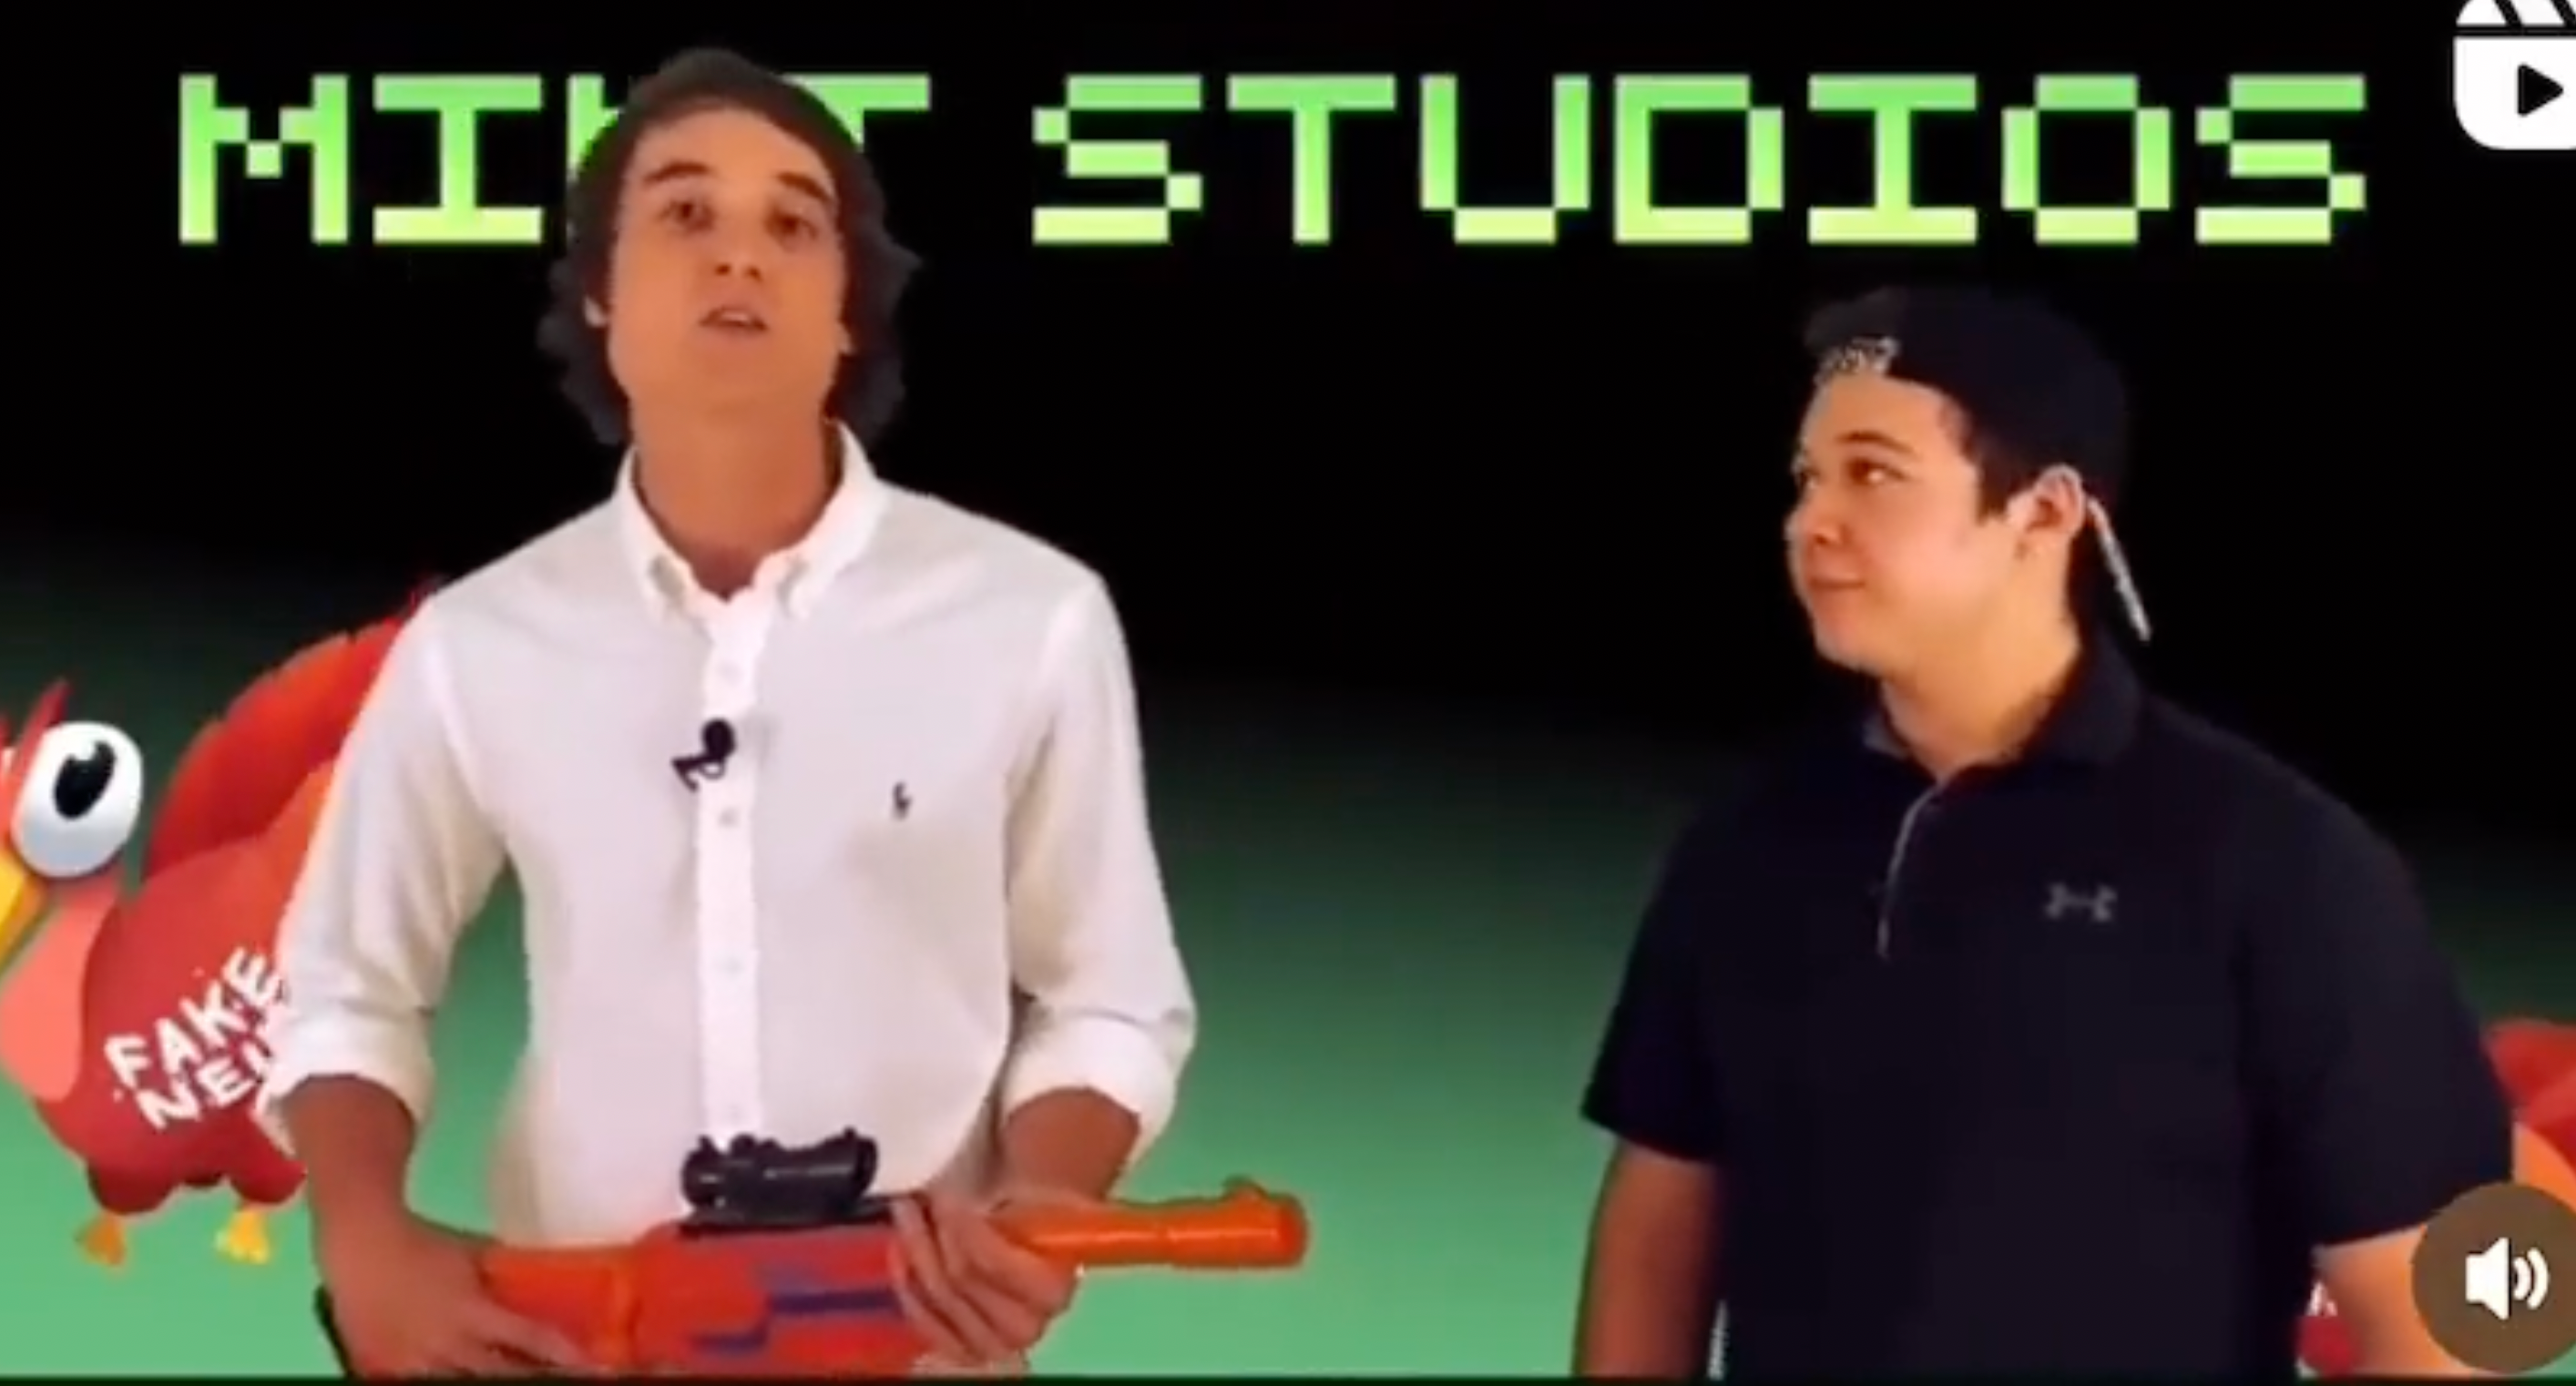 Kyle Rittenhouse, right, appears in ad for video game called Turkey Shoot